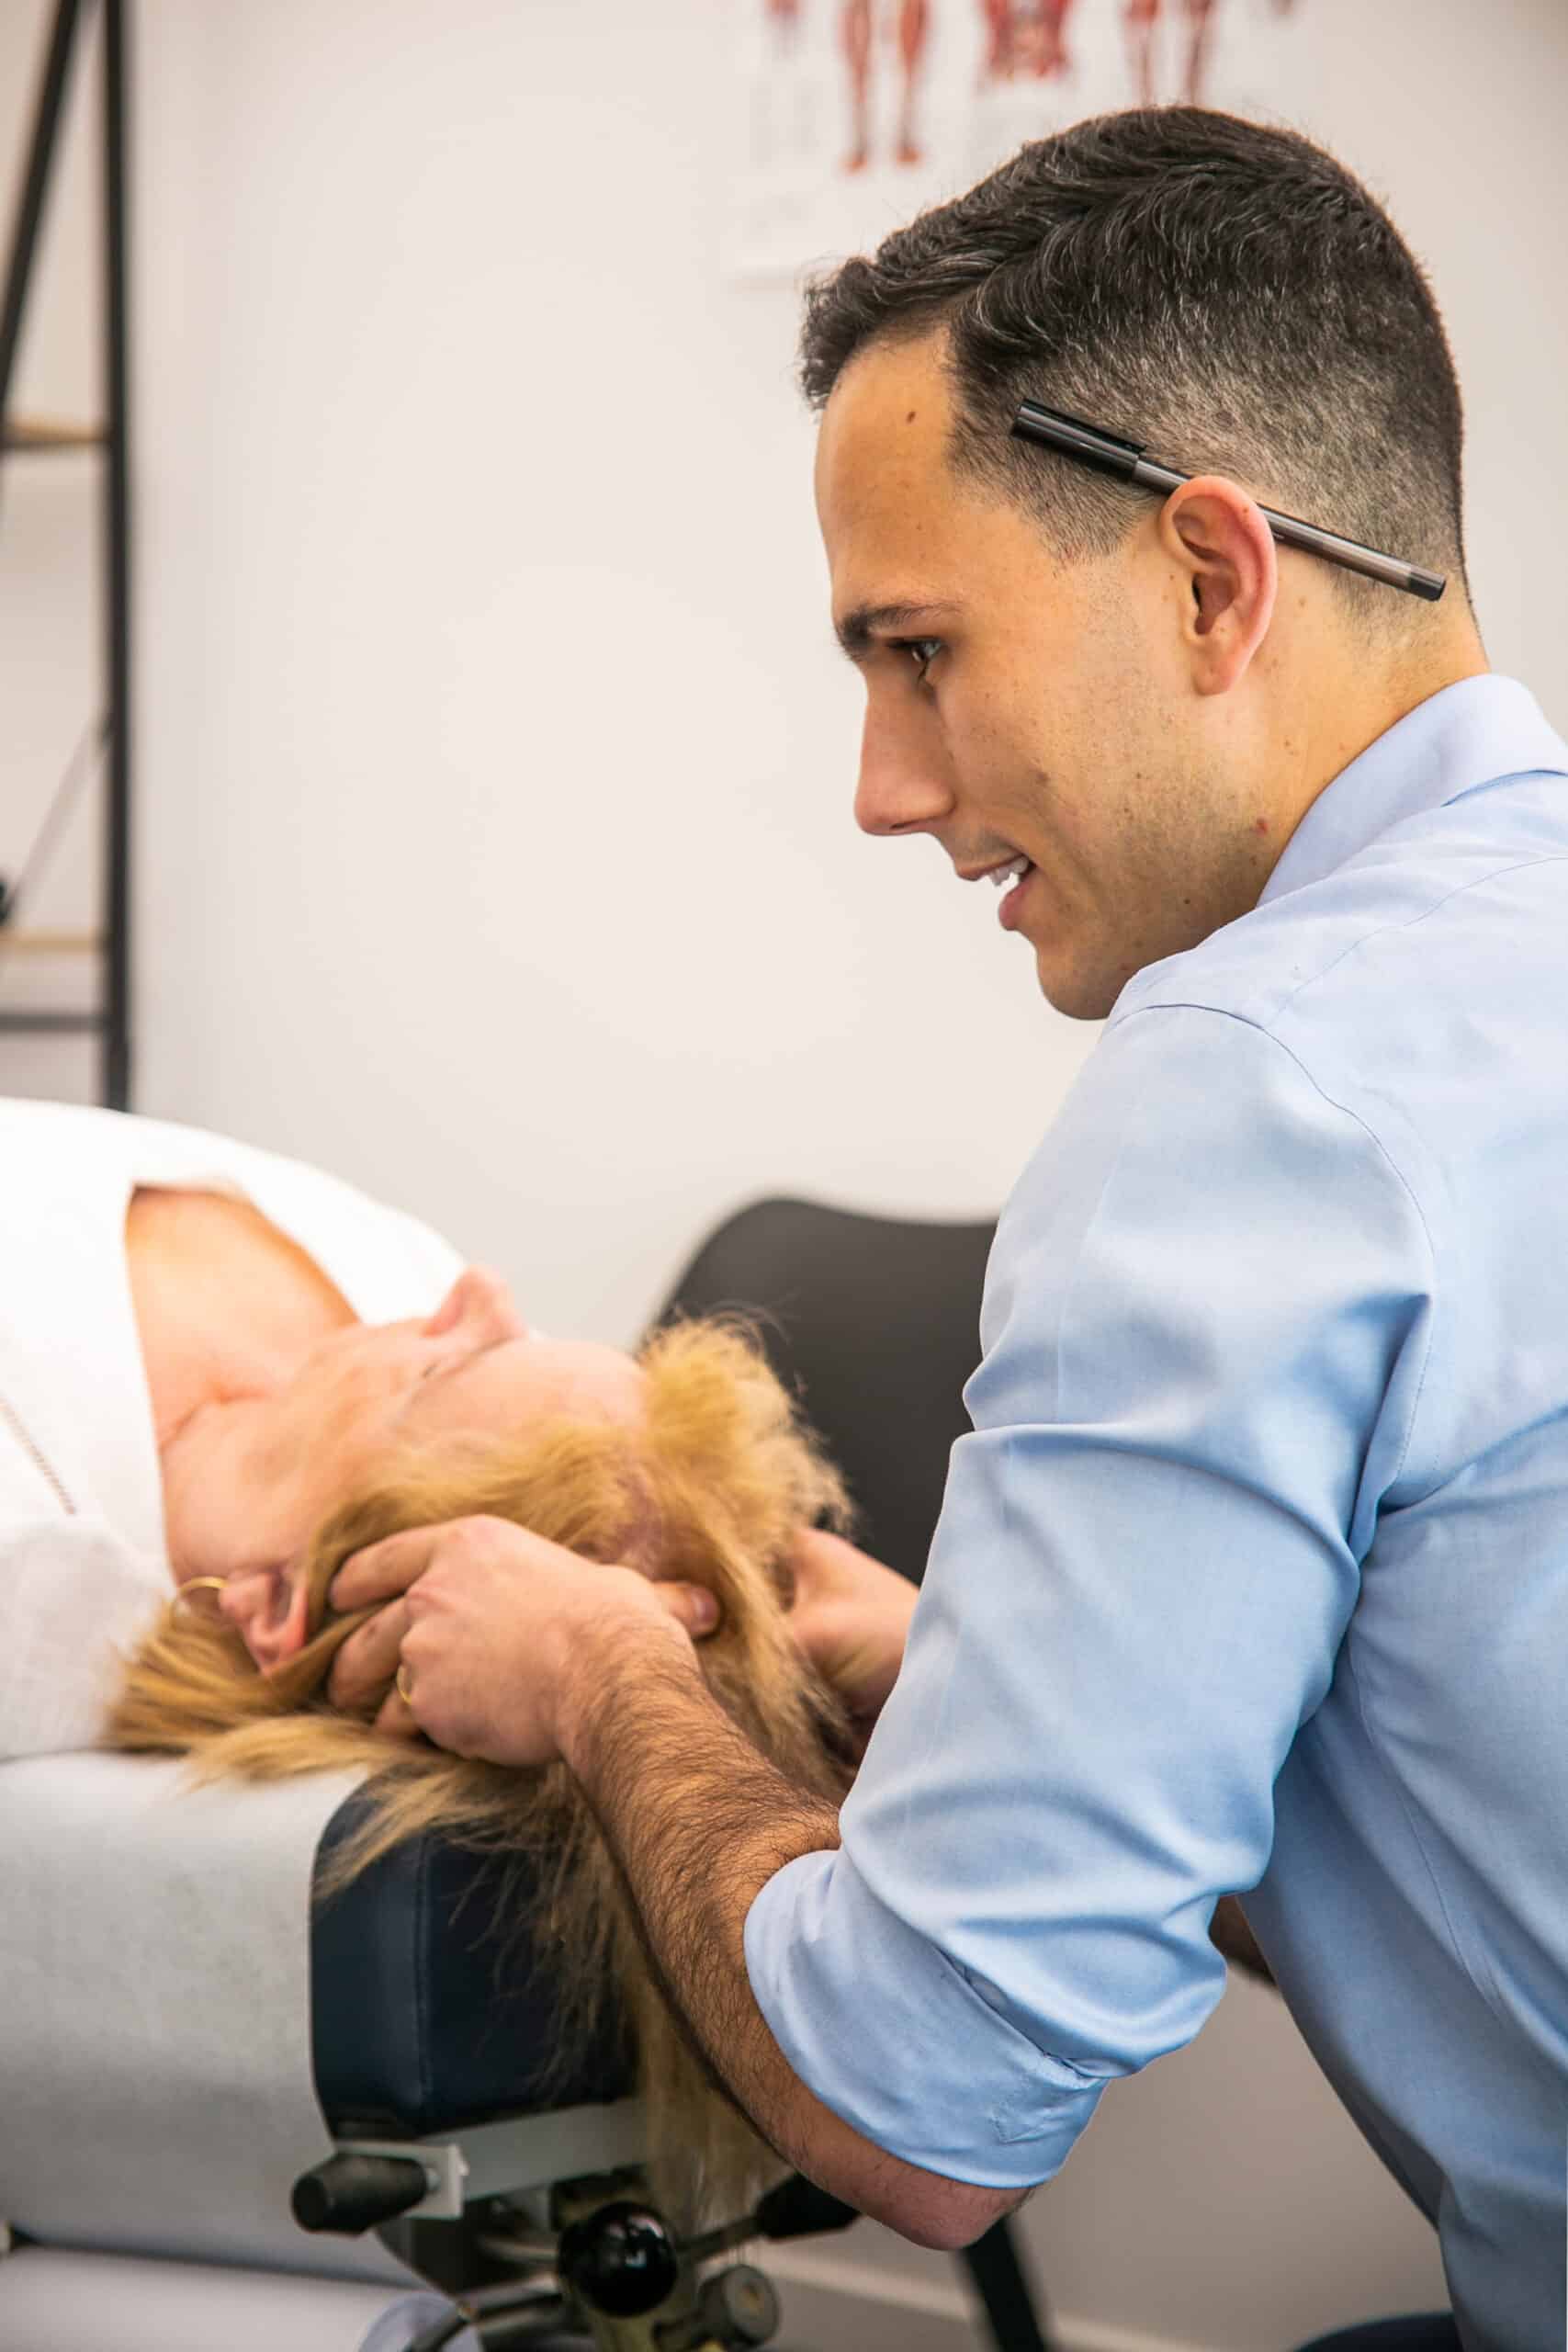 Male Geelong chiropractor performing manual chiropractic care to female client for head pain